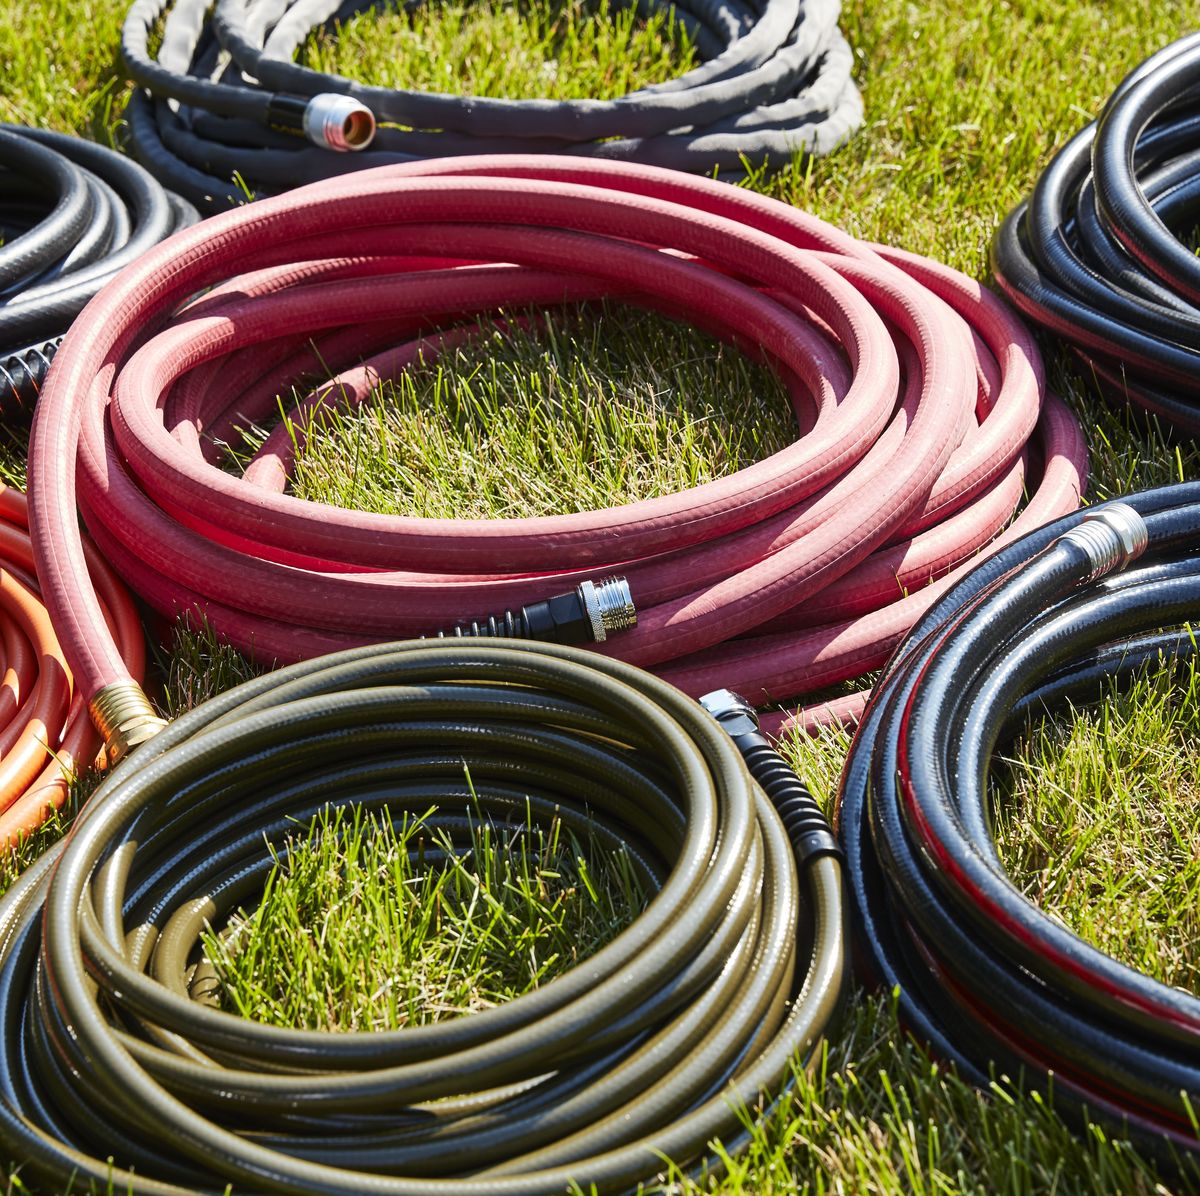 How to Increase Water Pressure in Garden Hose